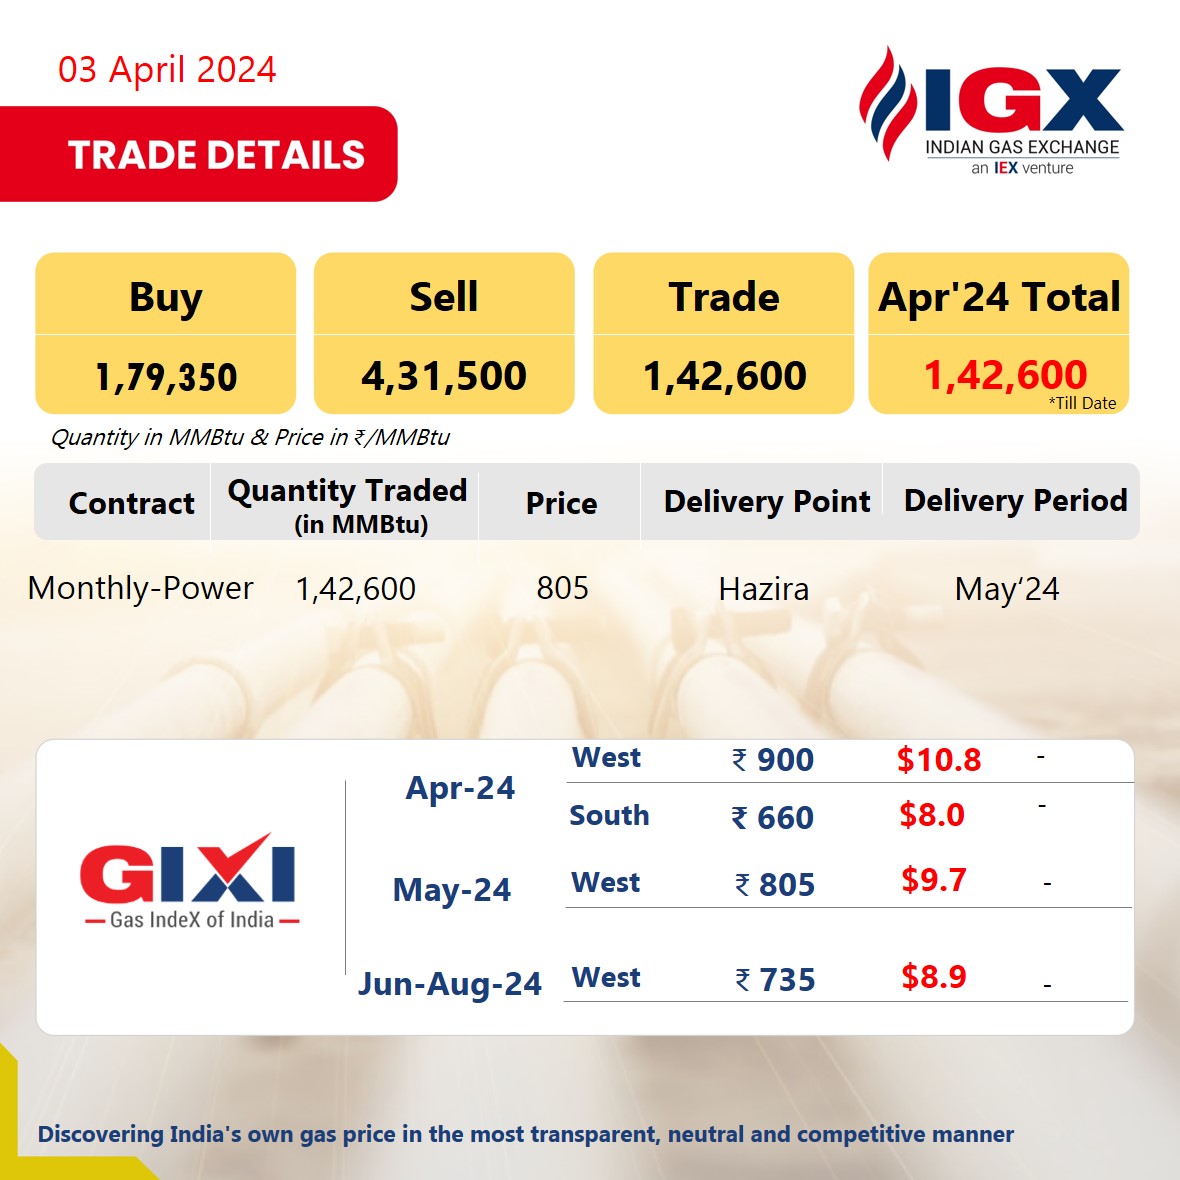 IGX trades 1,42,600 MMBTu quantity at Hazira delivery point, with delivery scheduled for May 2024.
#IGXIndia #GasMarkets #LNG #IGX